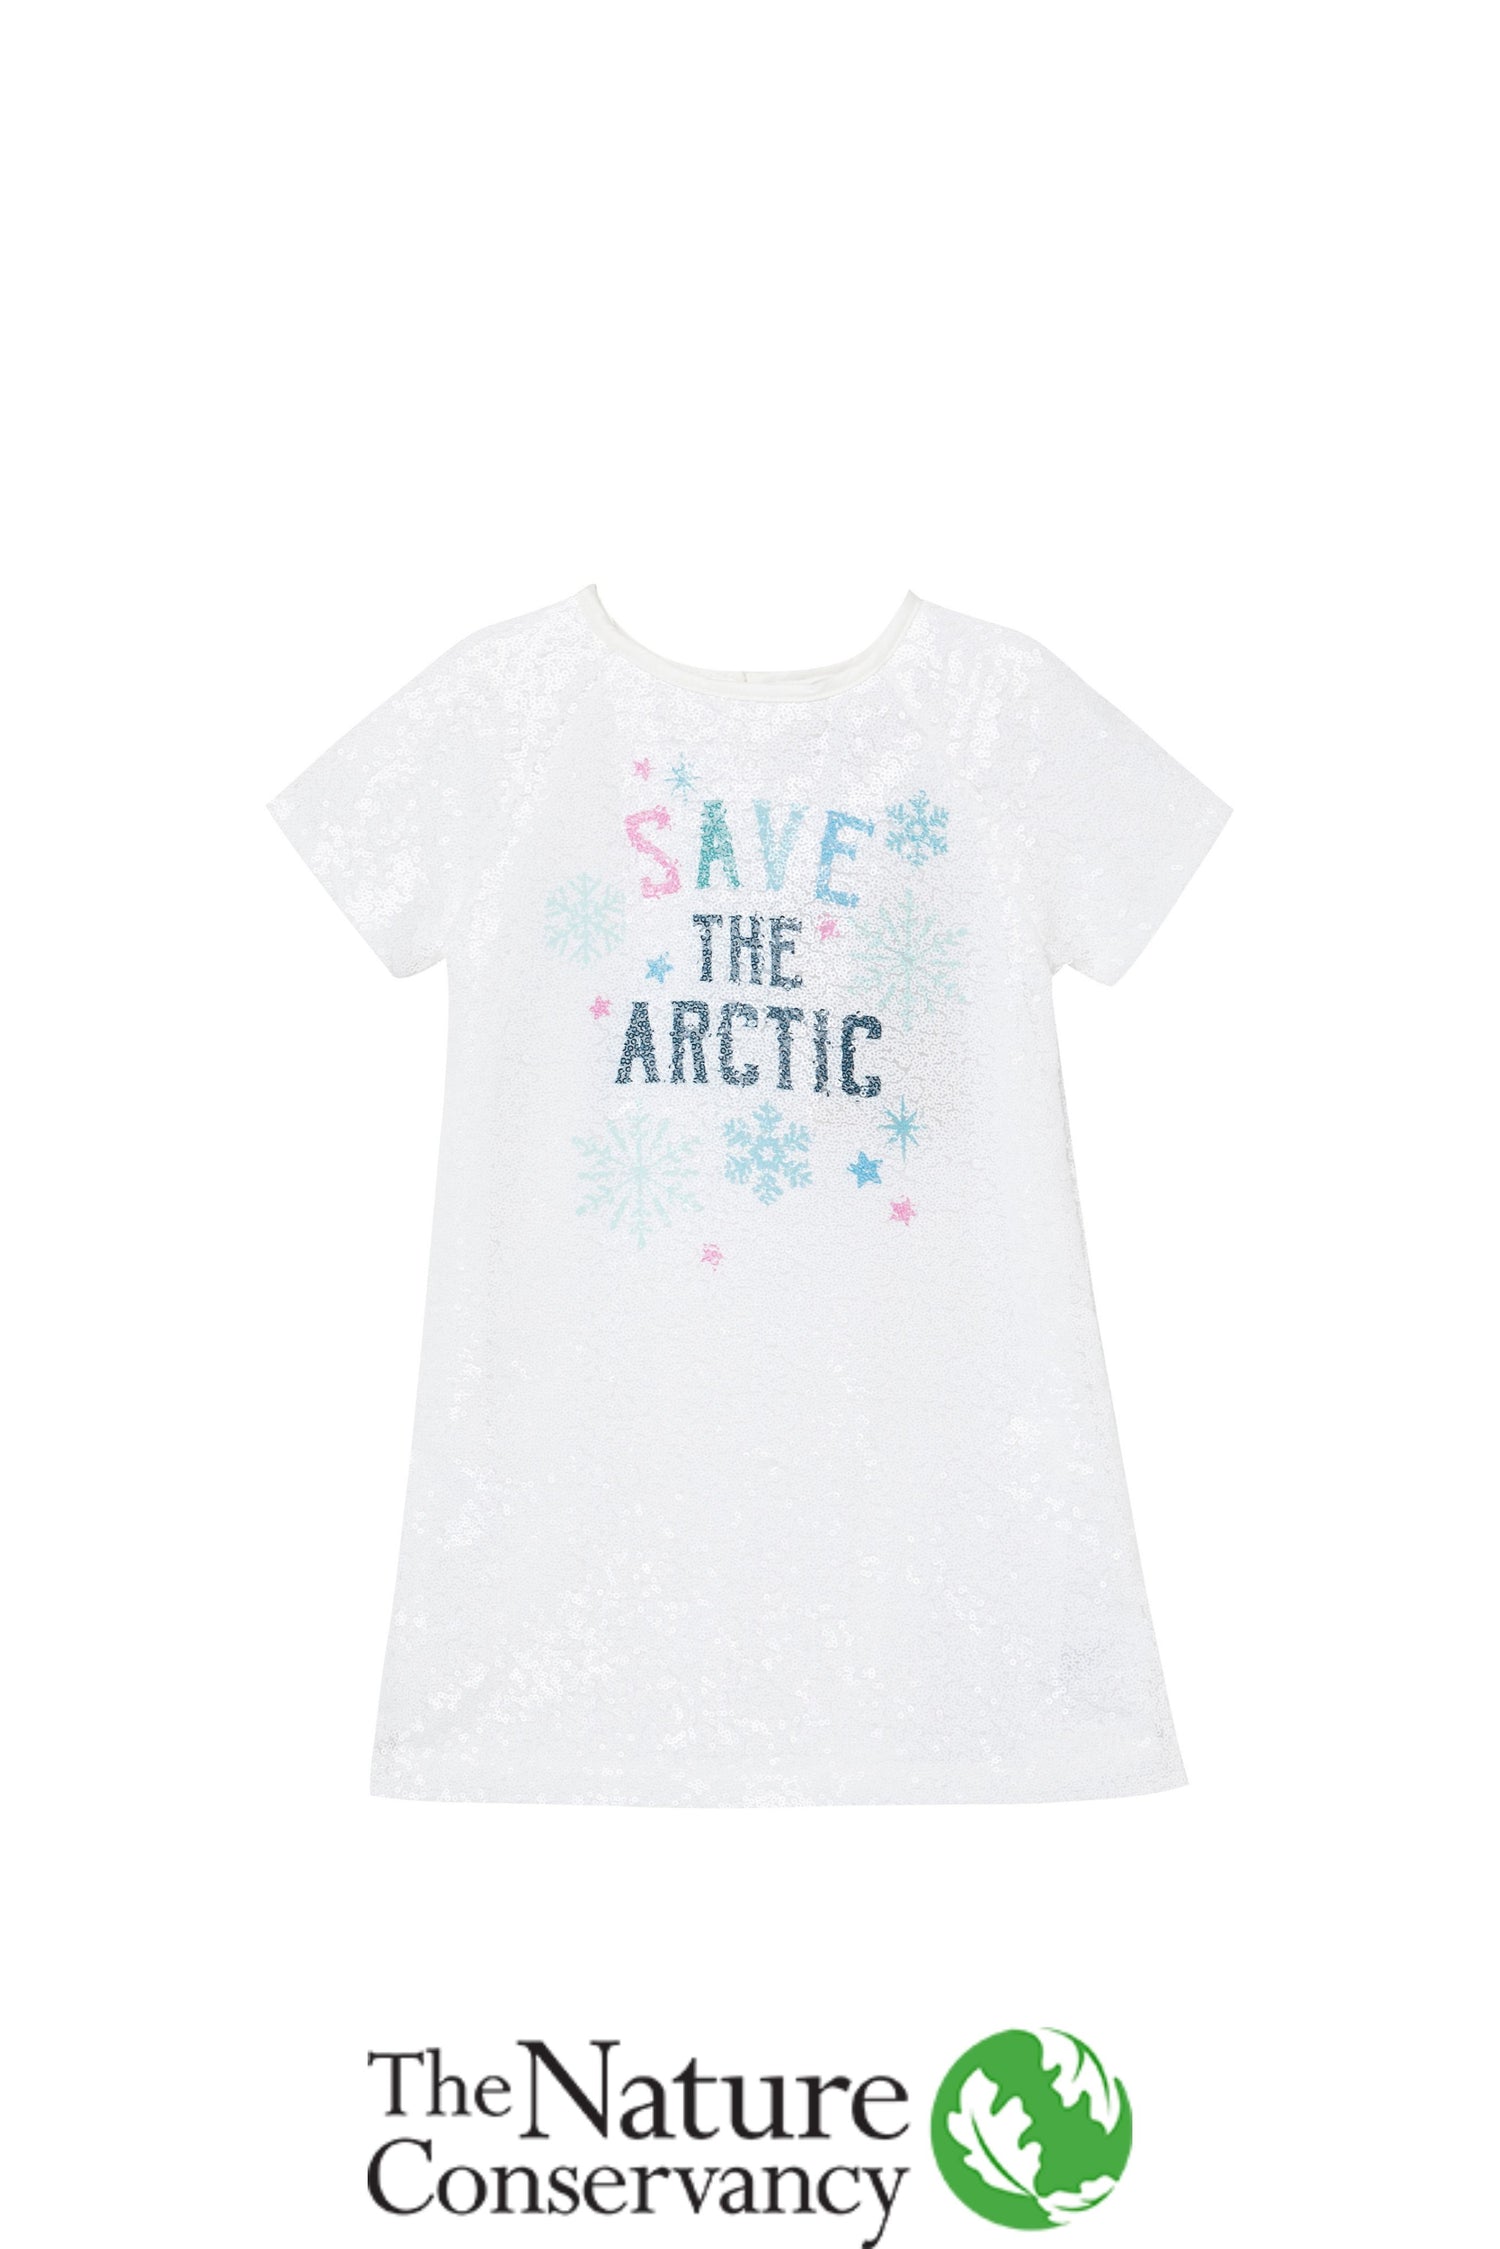 Front view of "Save the arctic" glitter tee